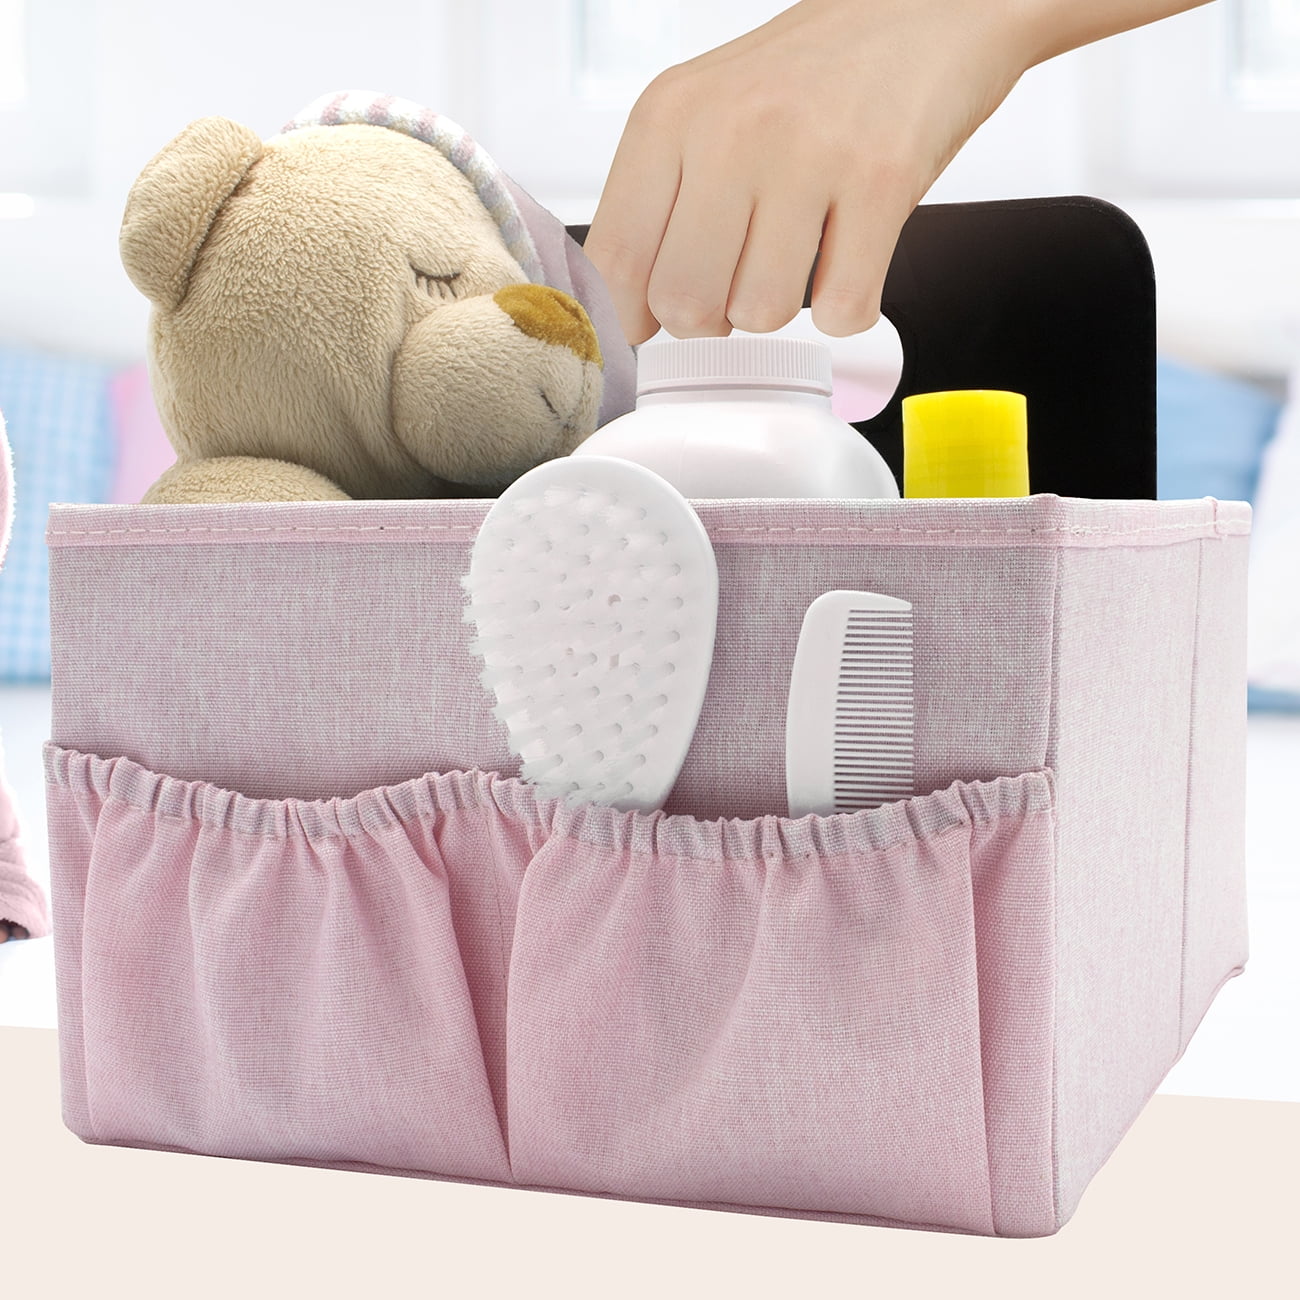 Luxury Storage Sorbus Baby Organizer Diaper Caddy with Handle Pink